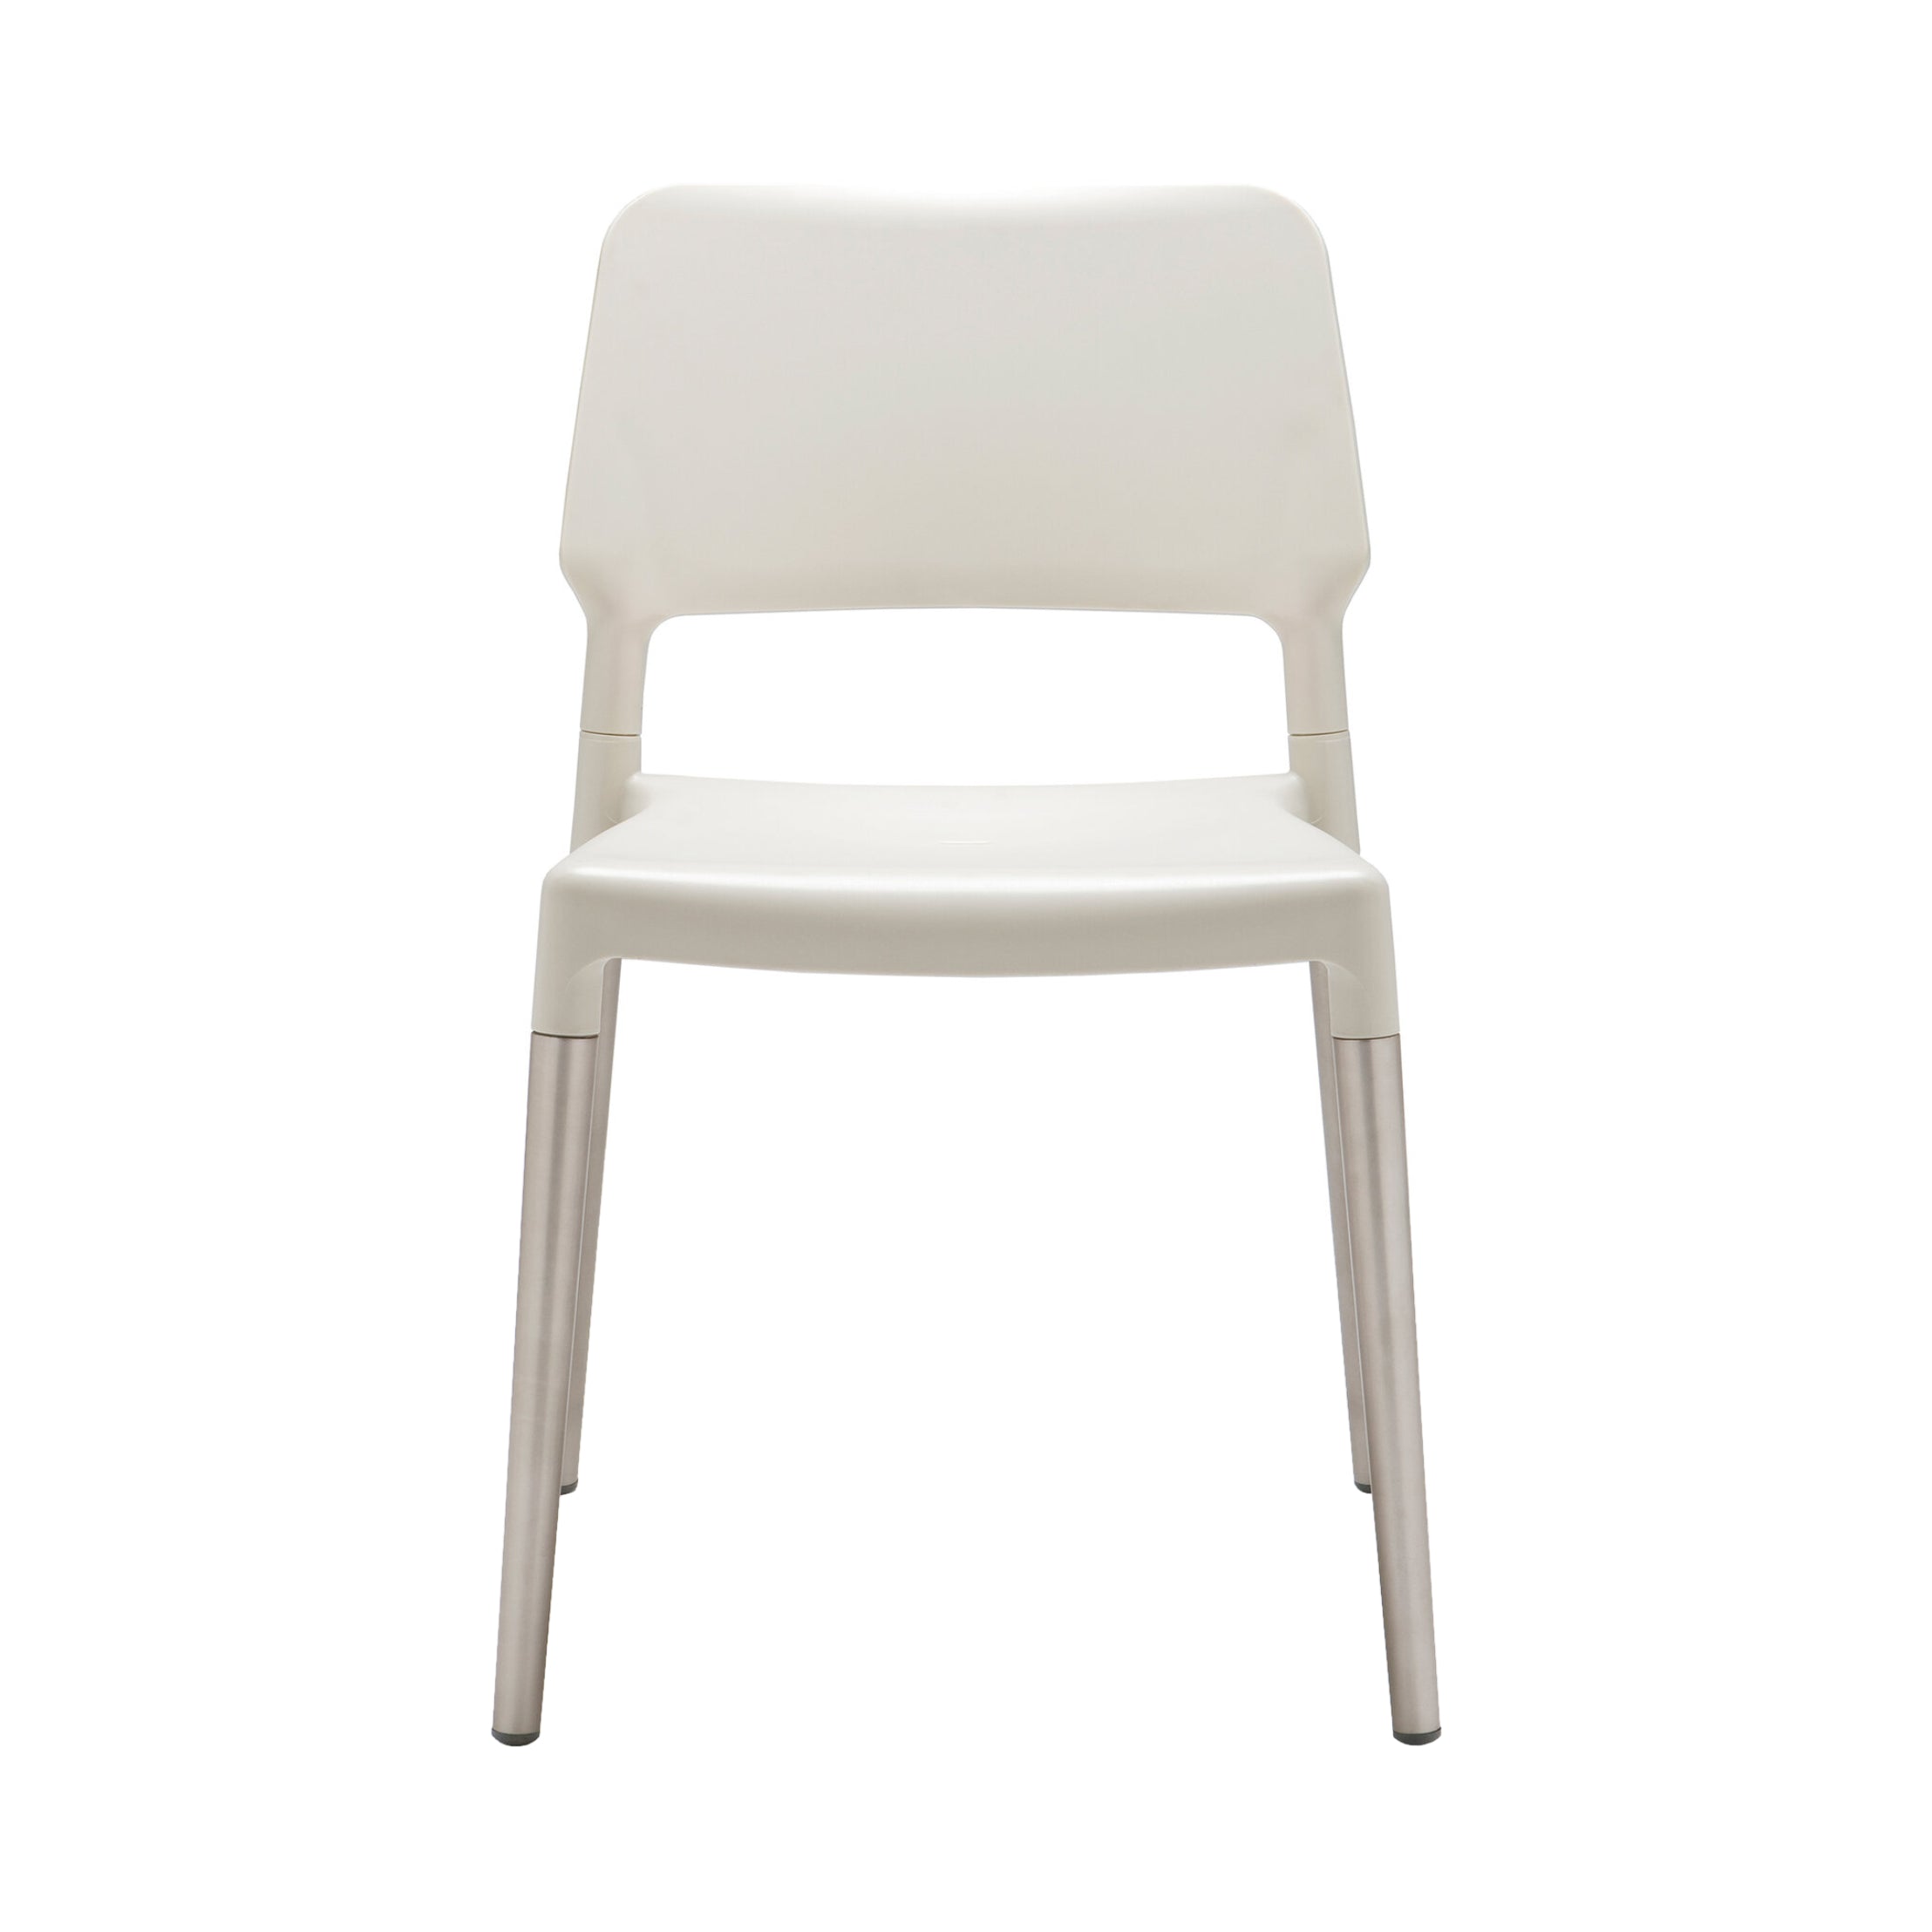 Belloch Chair: Outdoor + Stacking